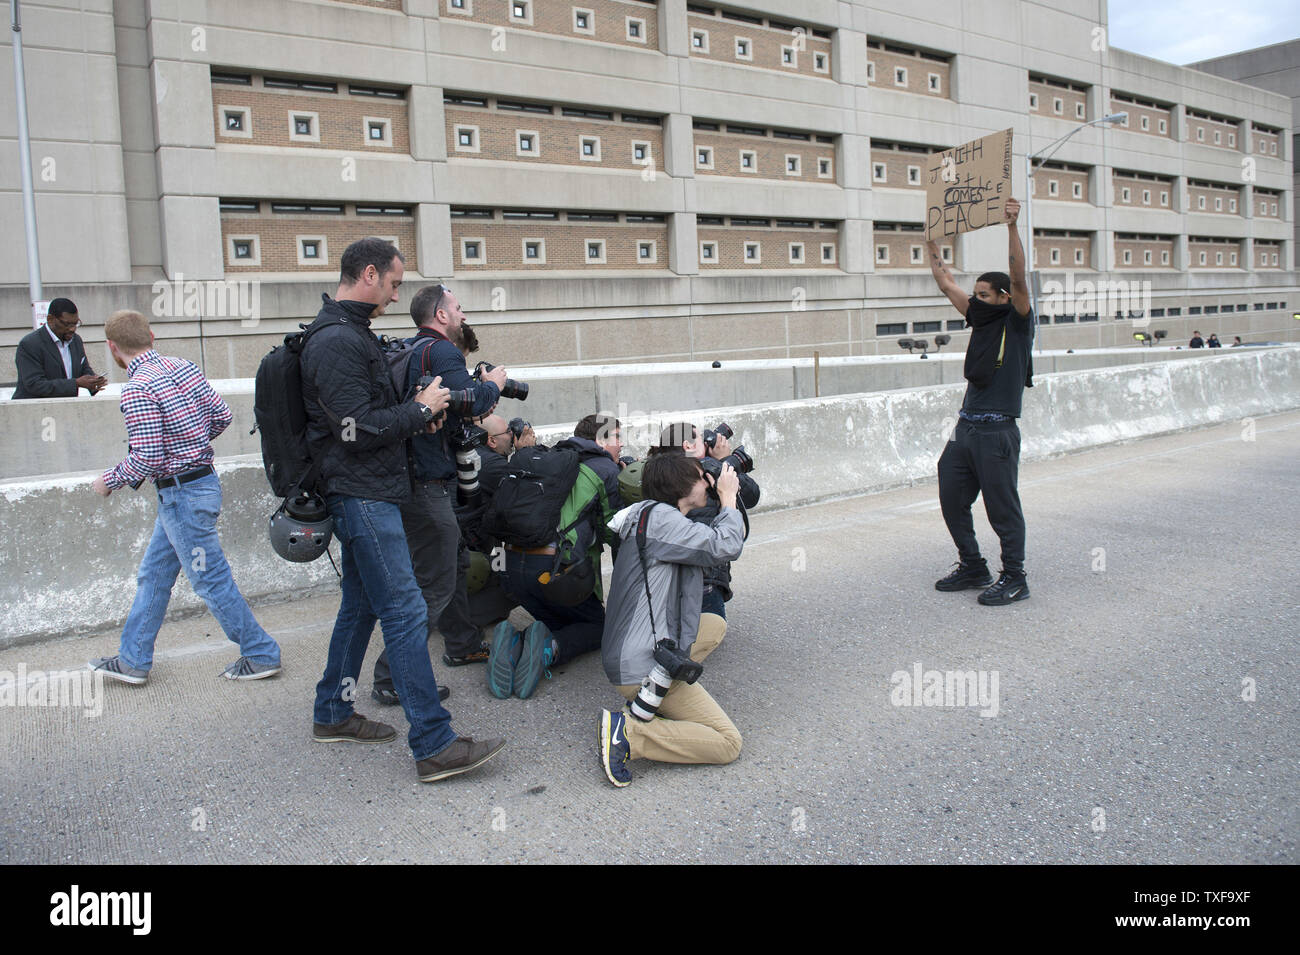 Photographers take pictures of Caron Carroll, 18, of Baltimore as he blocks an off ramp to rt 83 during the Black Lives Matter May Day Action Protest to show support for Freddie Gray and all arrested protesters, in Baltimore, Maryland, May 1, 2015. Baltimore City state's attorney Marilyn Mosby, announced earlier today that the death of Freddie Gray was a homicide and said the six arresting officers will be charged. Gray, 25, who was arrested on April 12, died a week later in the hospital from spinal cord injury he received while in police custody. Photo by Kevin Dietsch/UPI Stock Photo